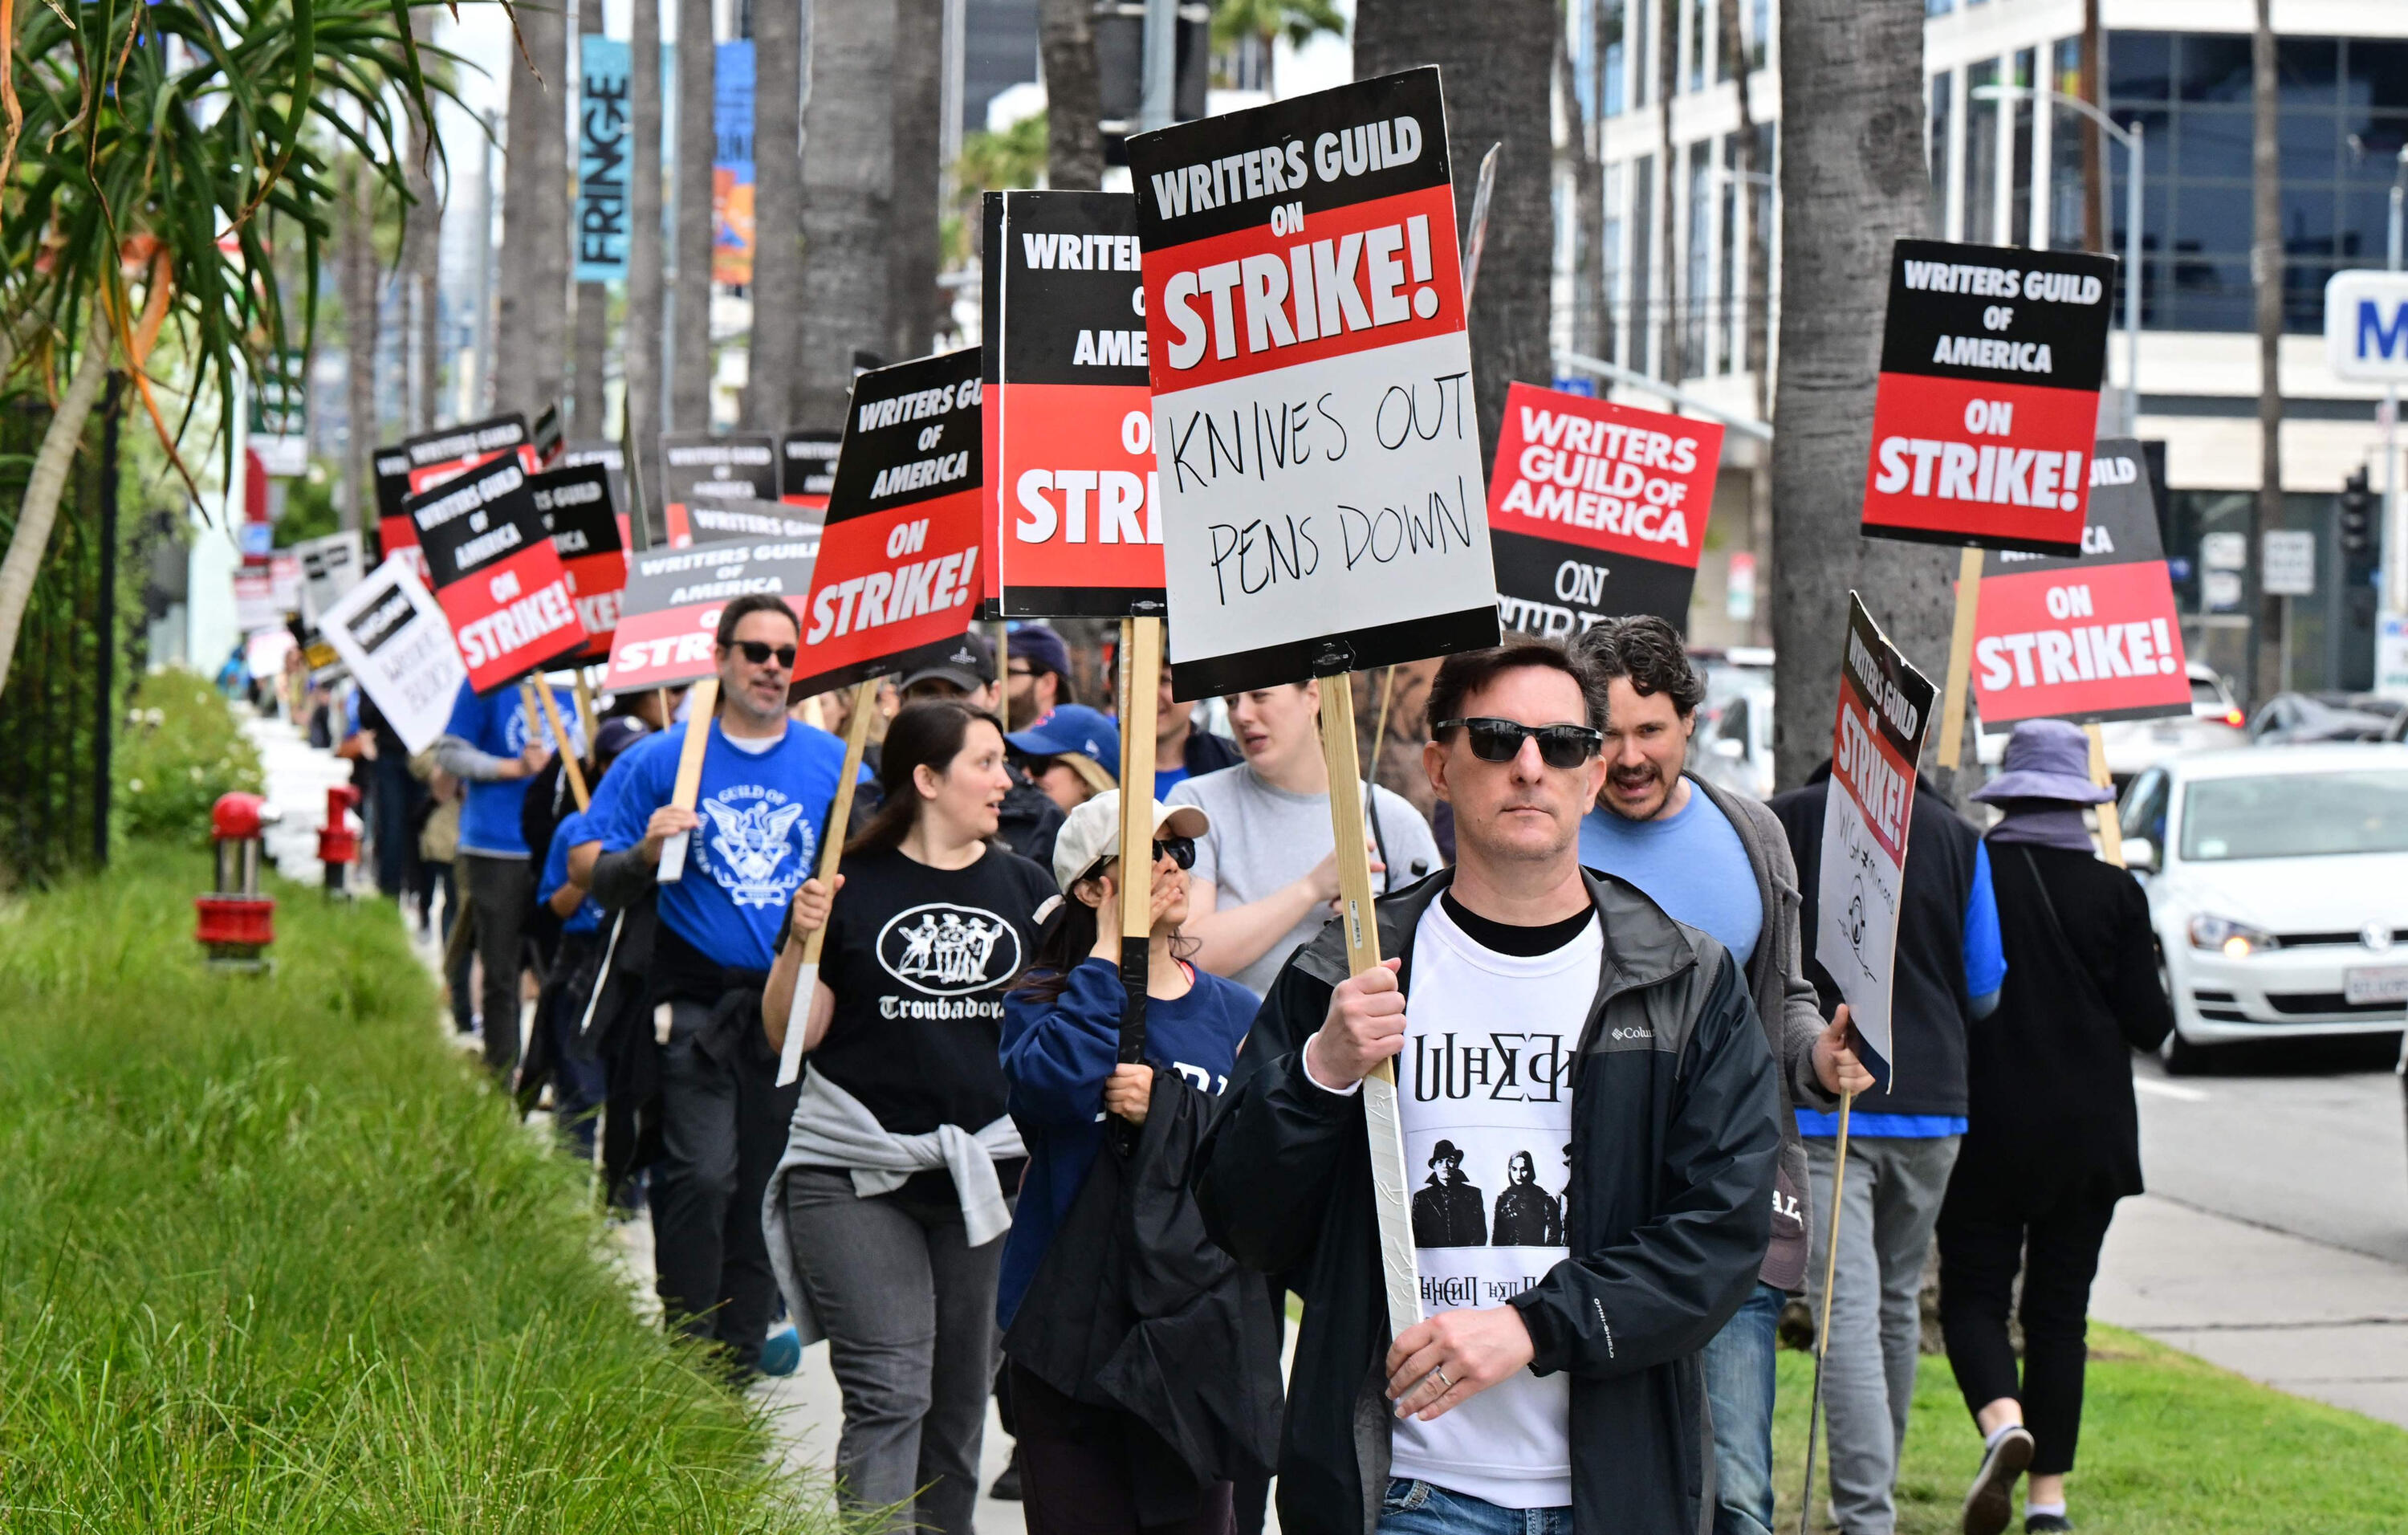 The Hollywood writers strike is not over. The major issues